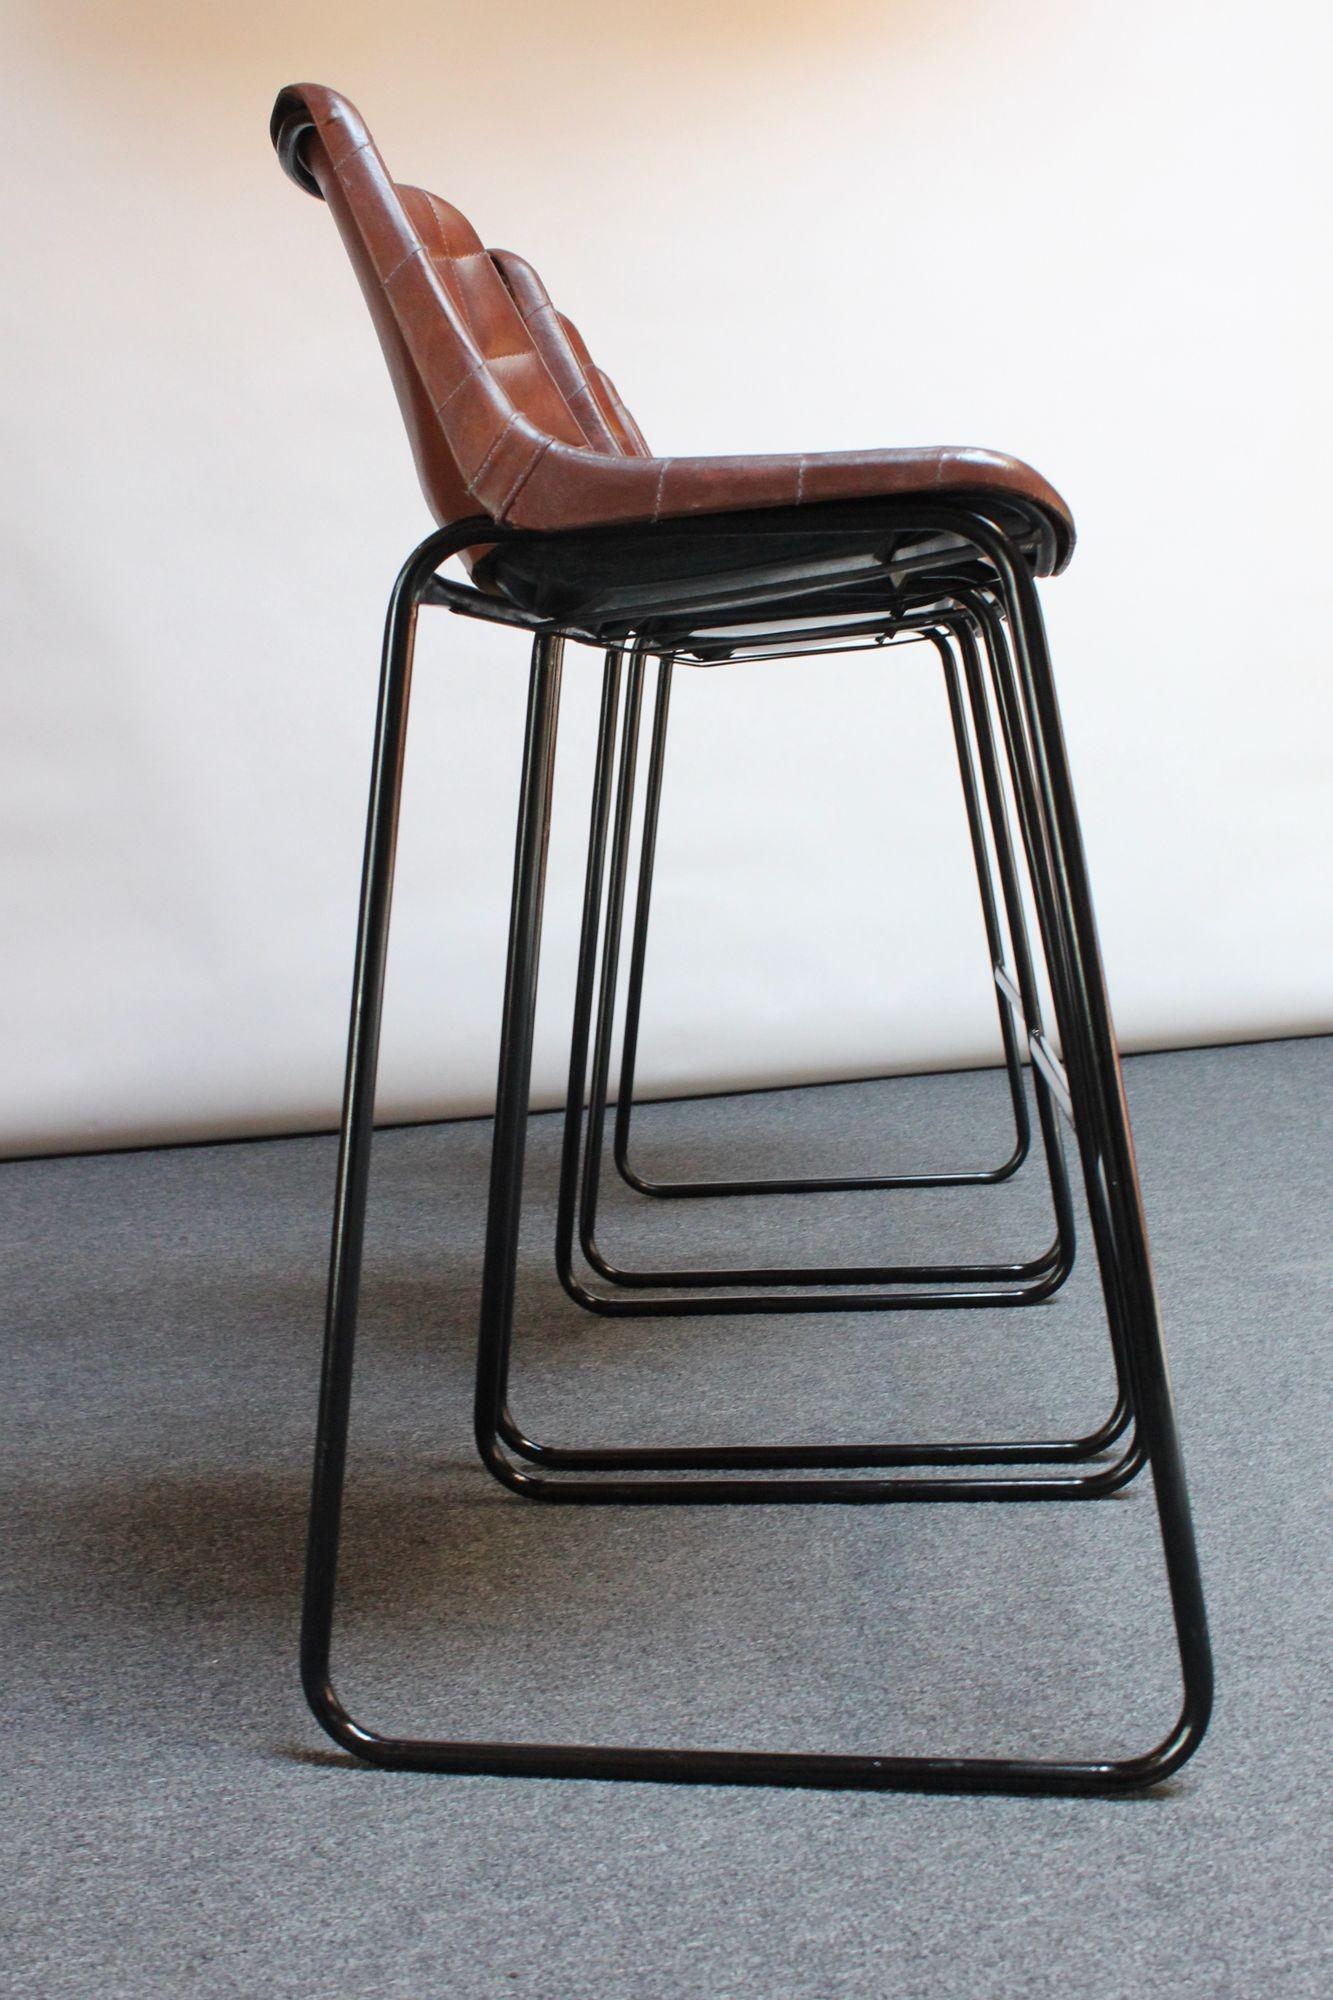 Set of three richly patinated barstools with leatherette seats supported by wrought iron and steel frames with footrests (ca. 1970s, Italy). Though the maker is unknown, contemporary adaptations of these stools have been made within the last several